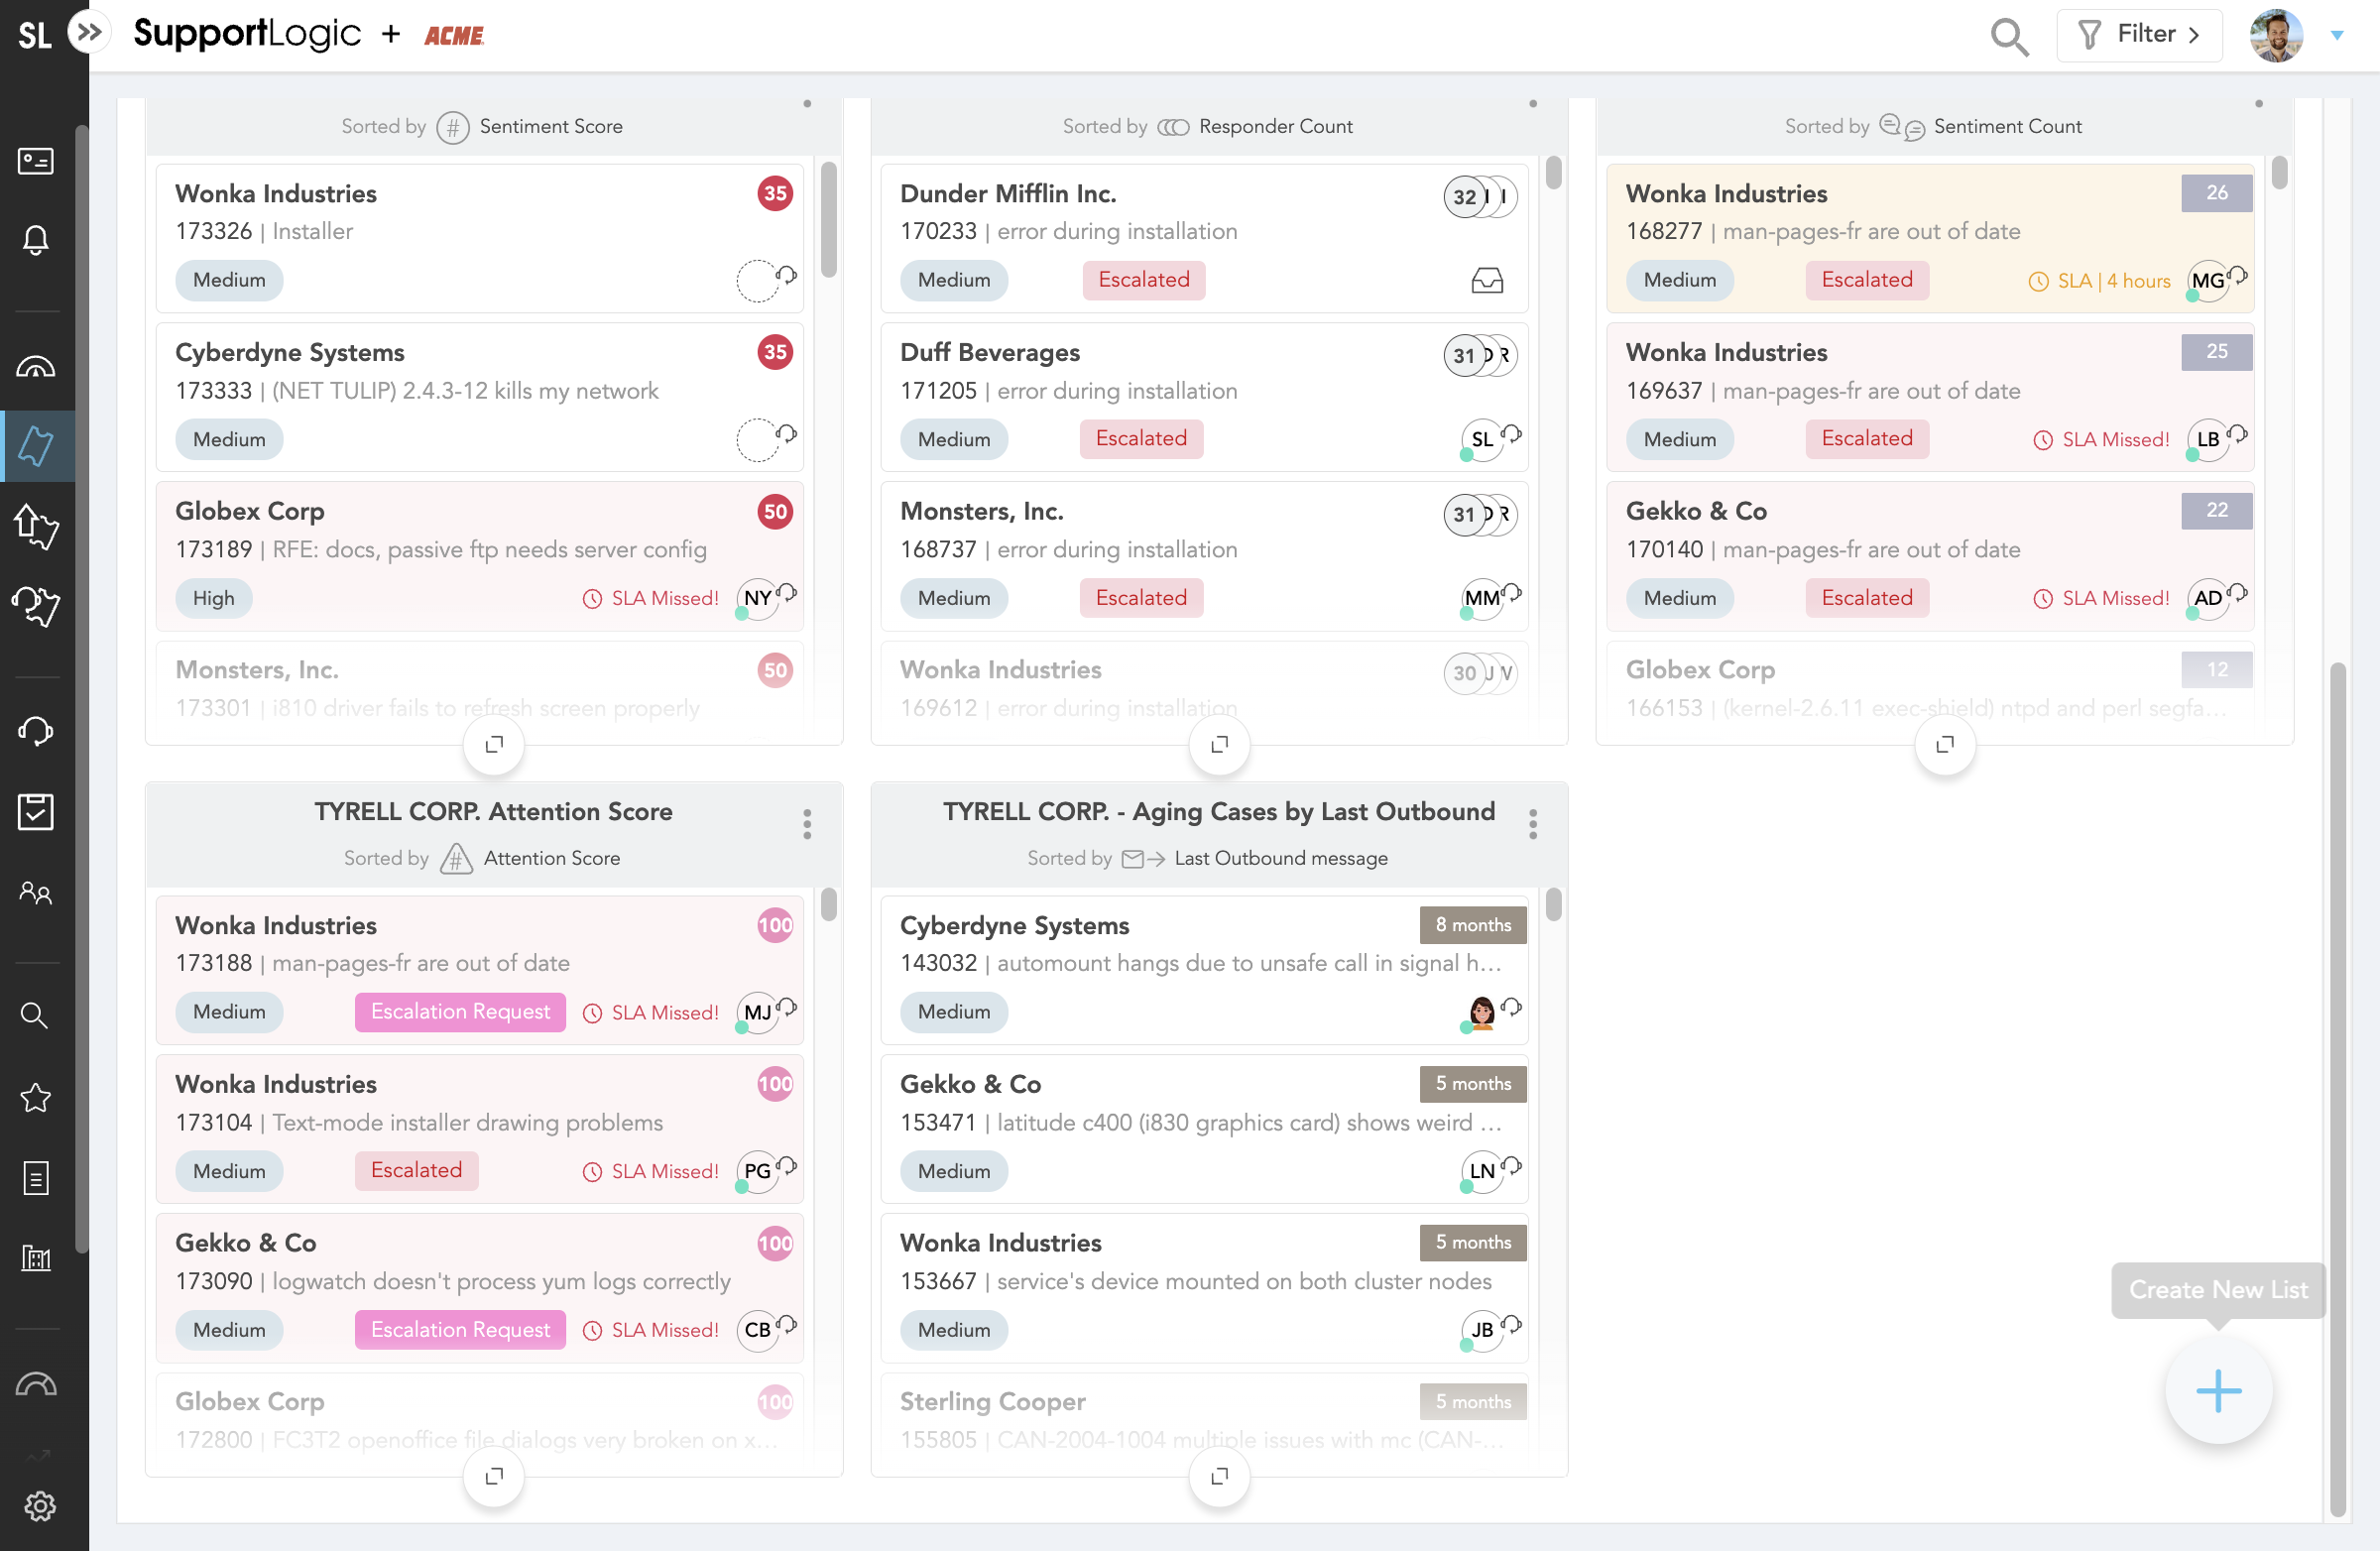 Slice up your case queue to tackle the most important issues first - saving your team time and resources.

Use filtering and case sentiment to create prioritized views to better assign cases, bring in experts, and reduce backlog.

And it's easy to create a new backlog view...